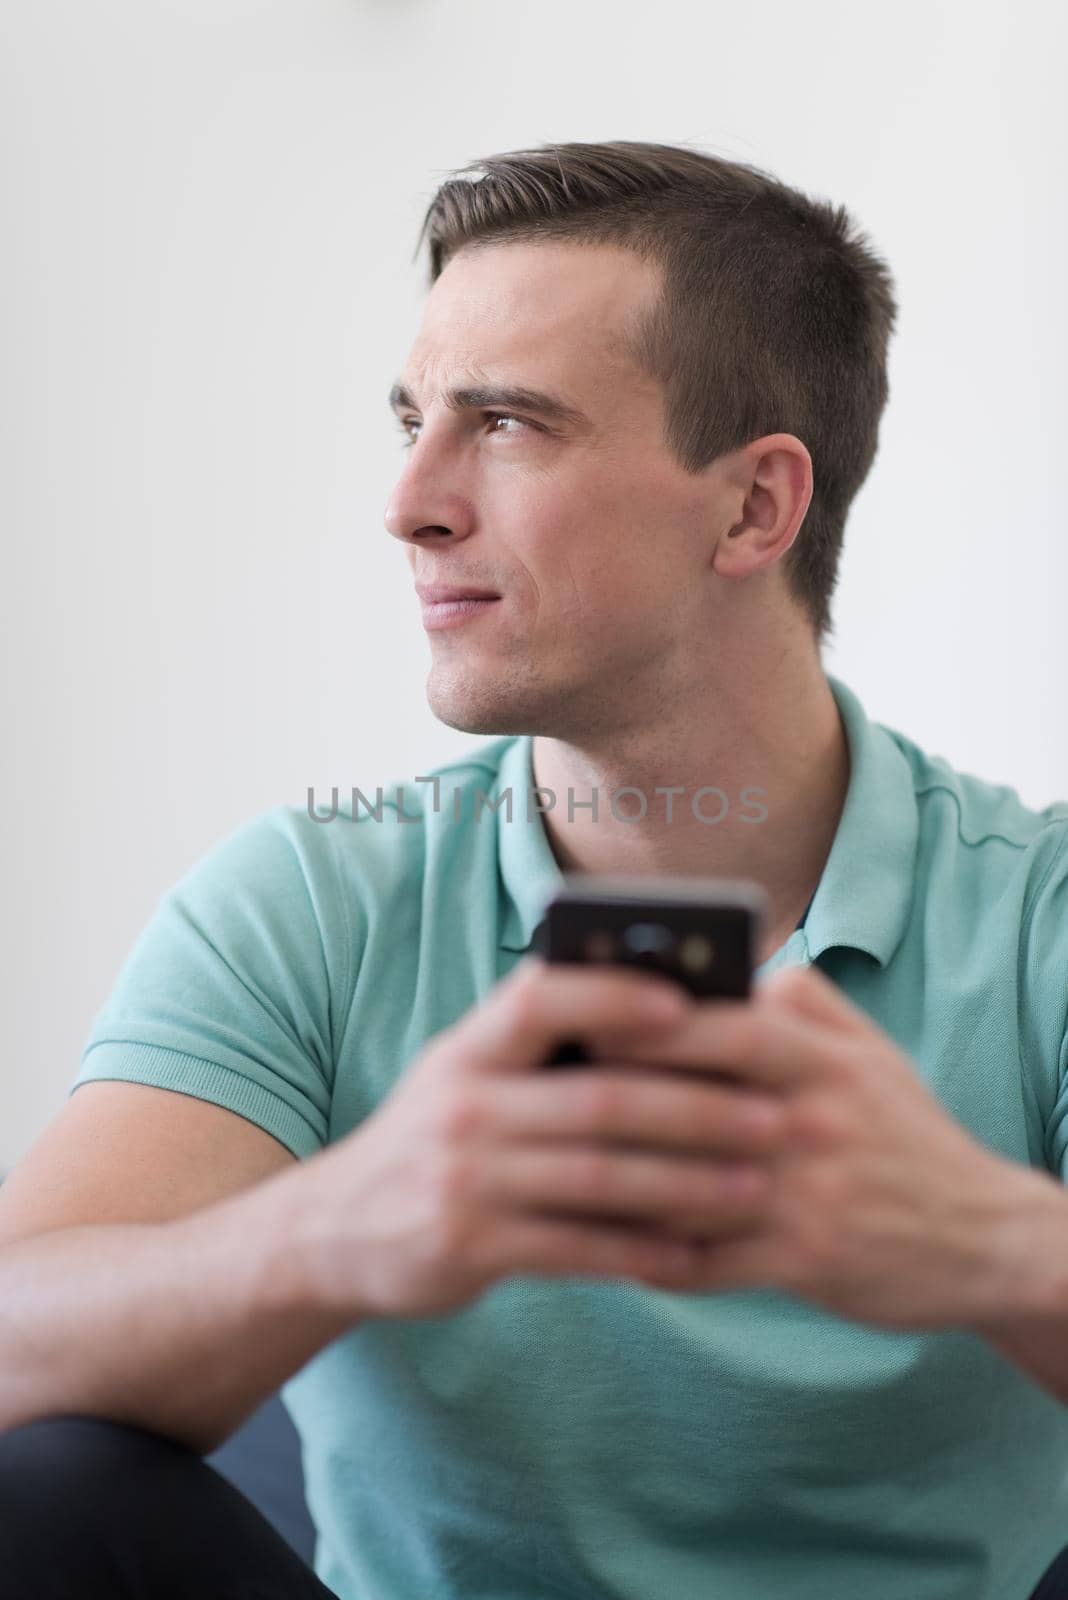 Handsome casual young man using a mobile phone at luxurious home